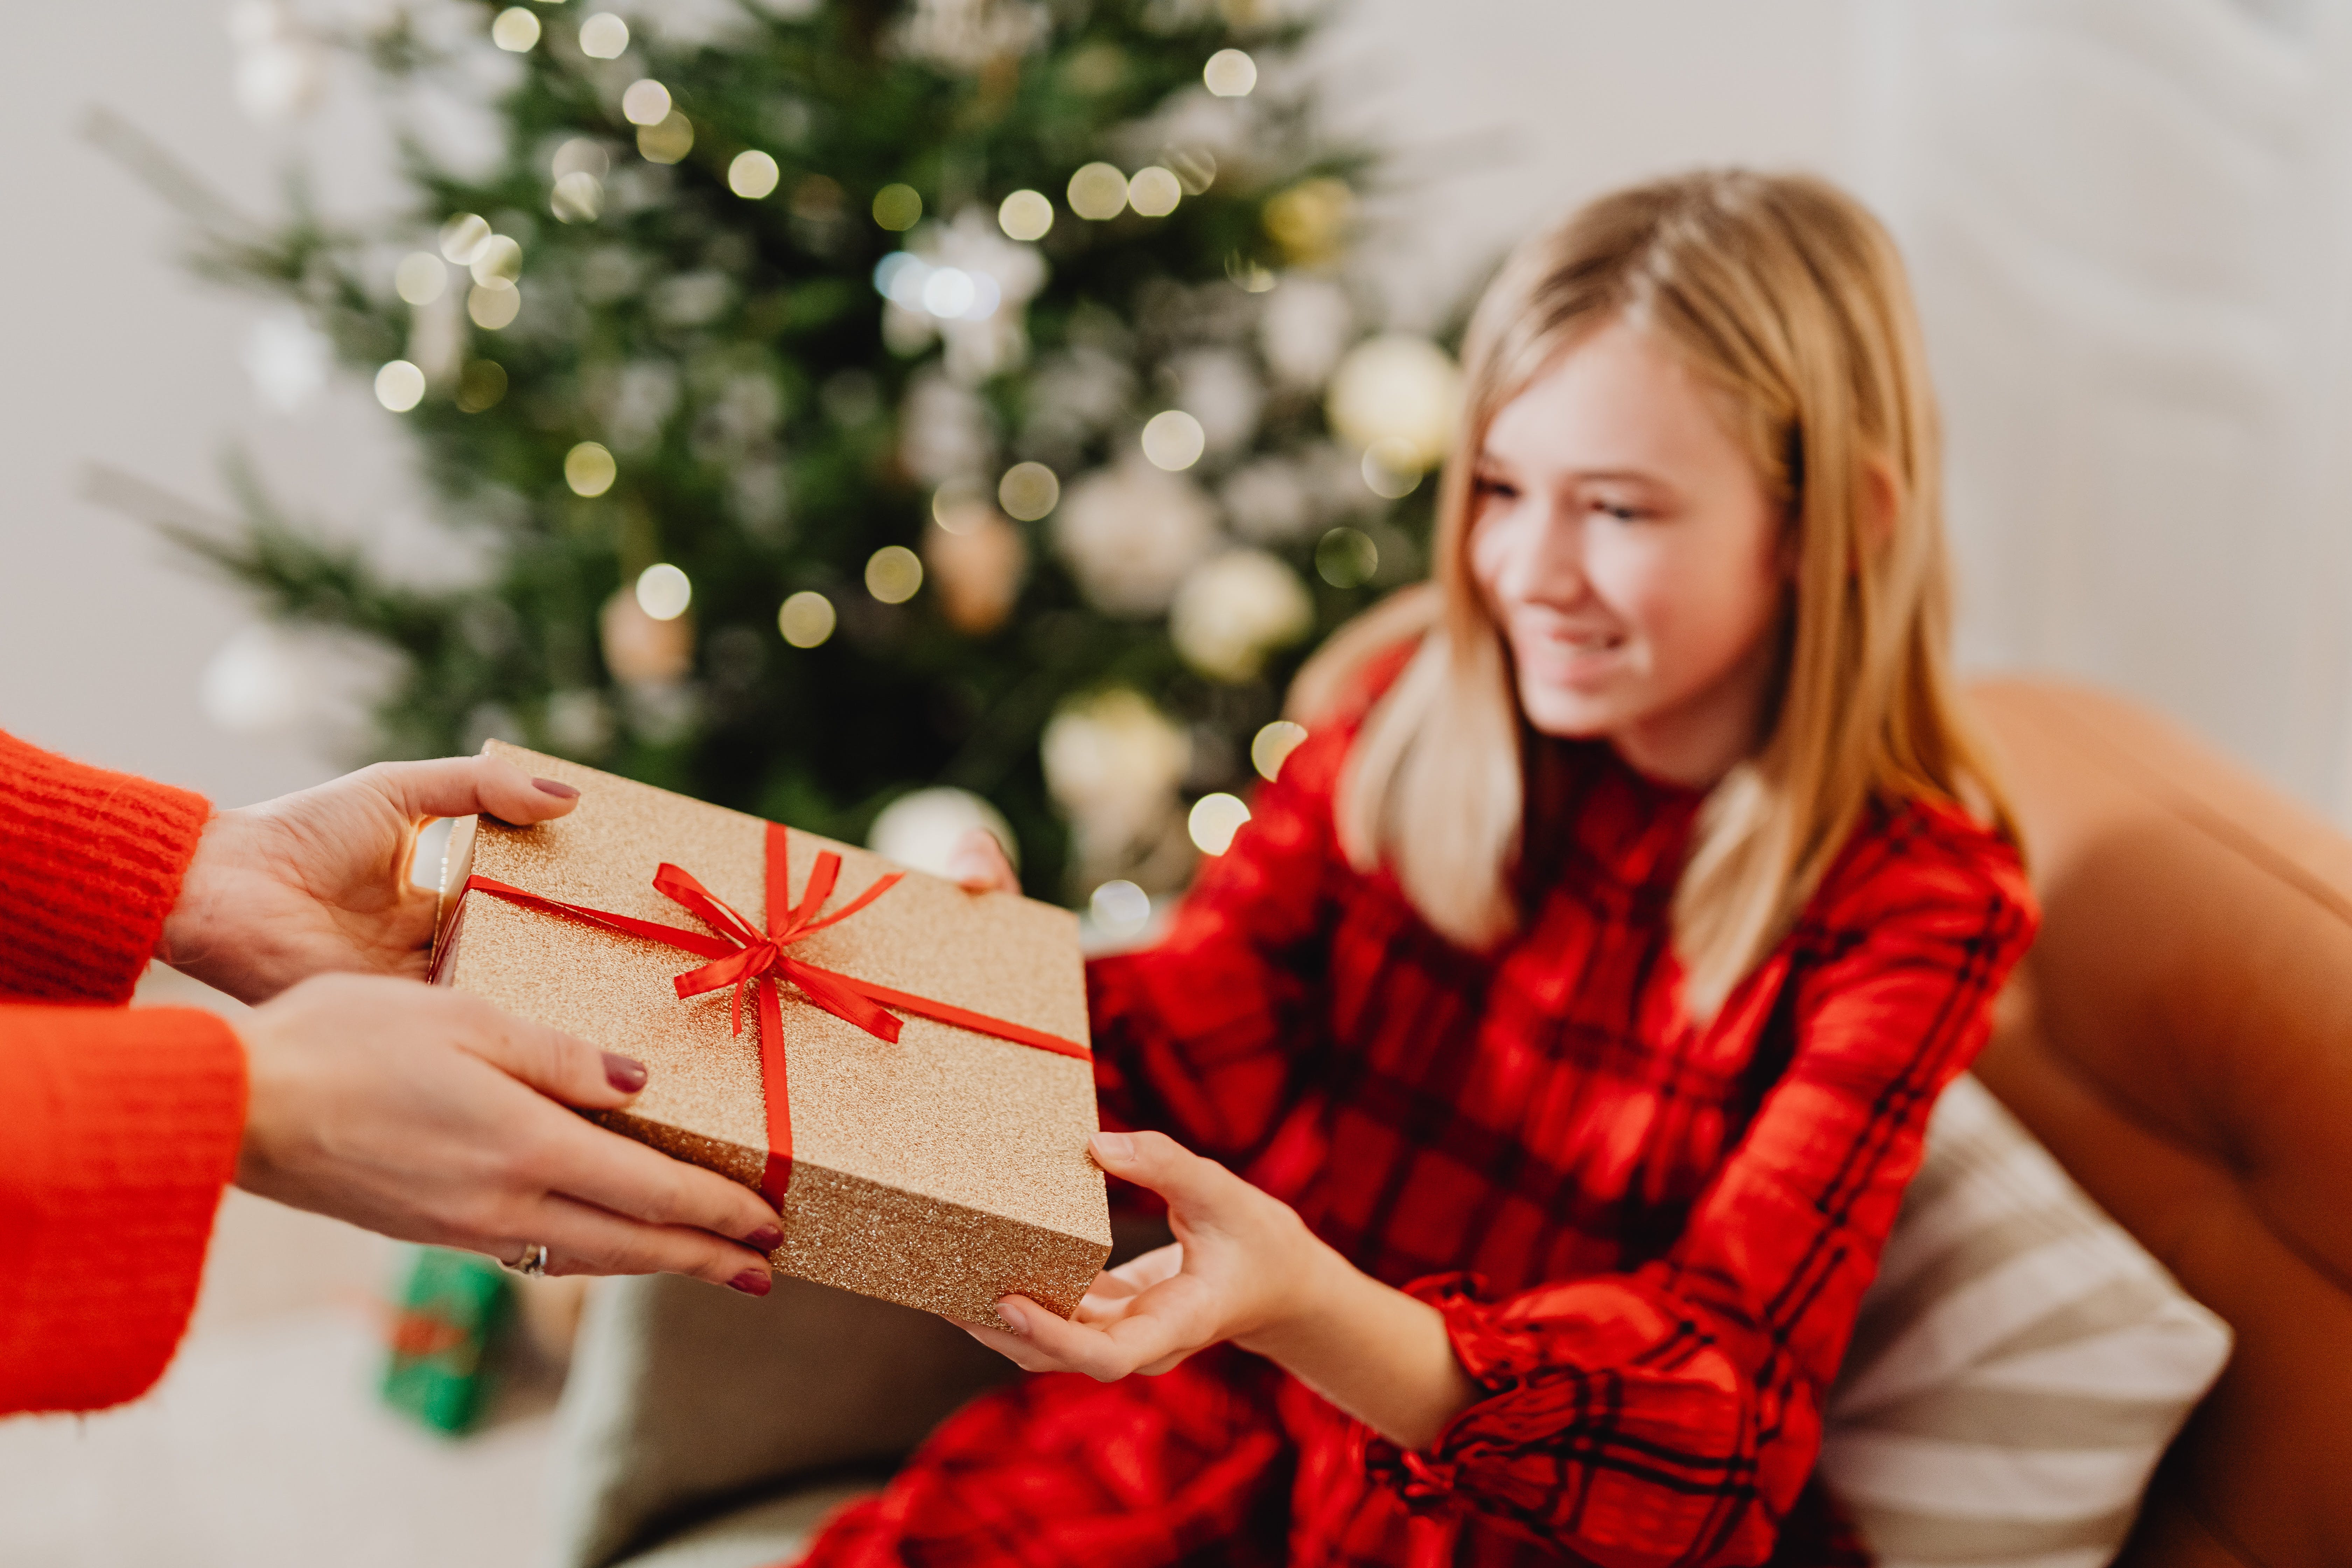 Which of Your Loved Ones Will Give You the Best Holiday Gift This Year?